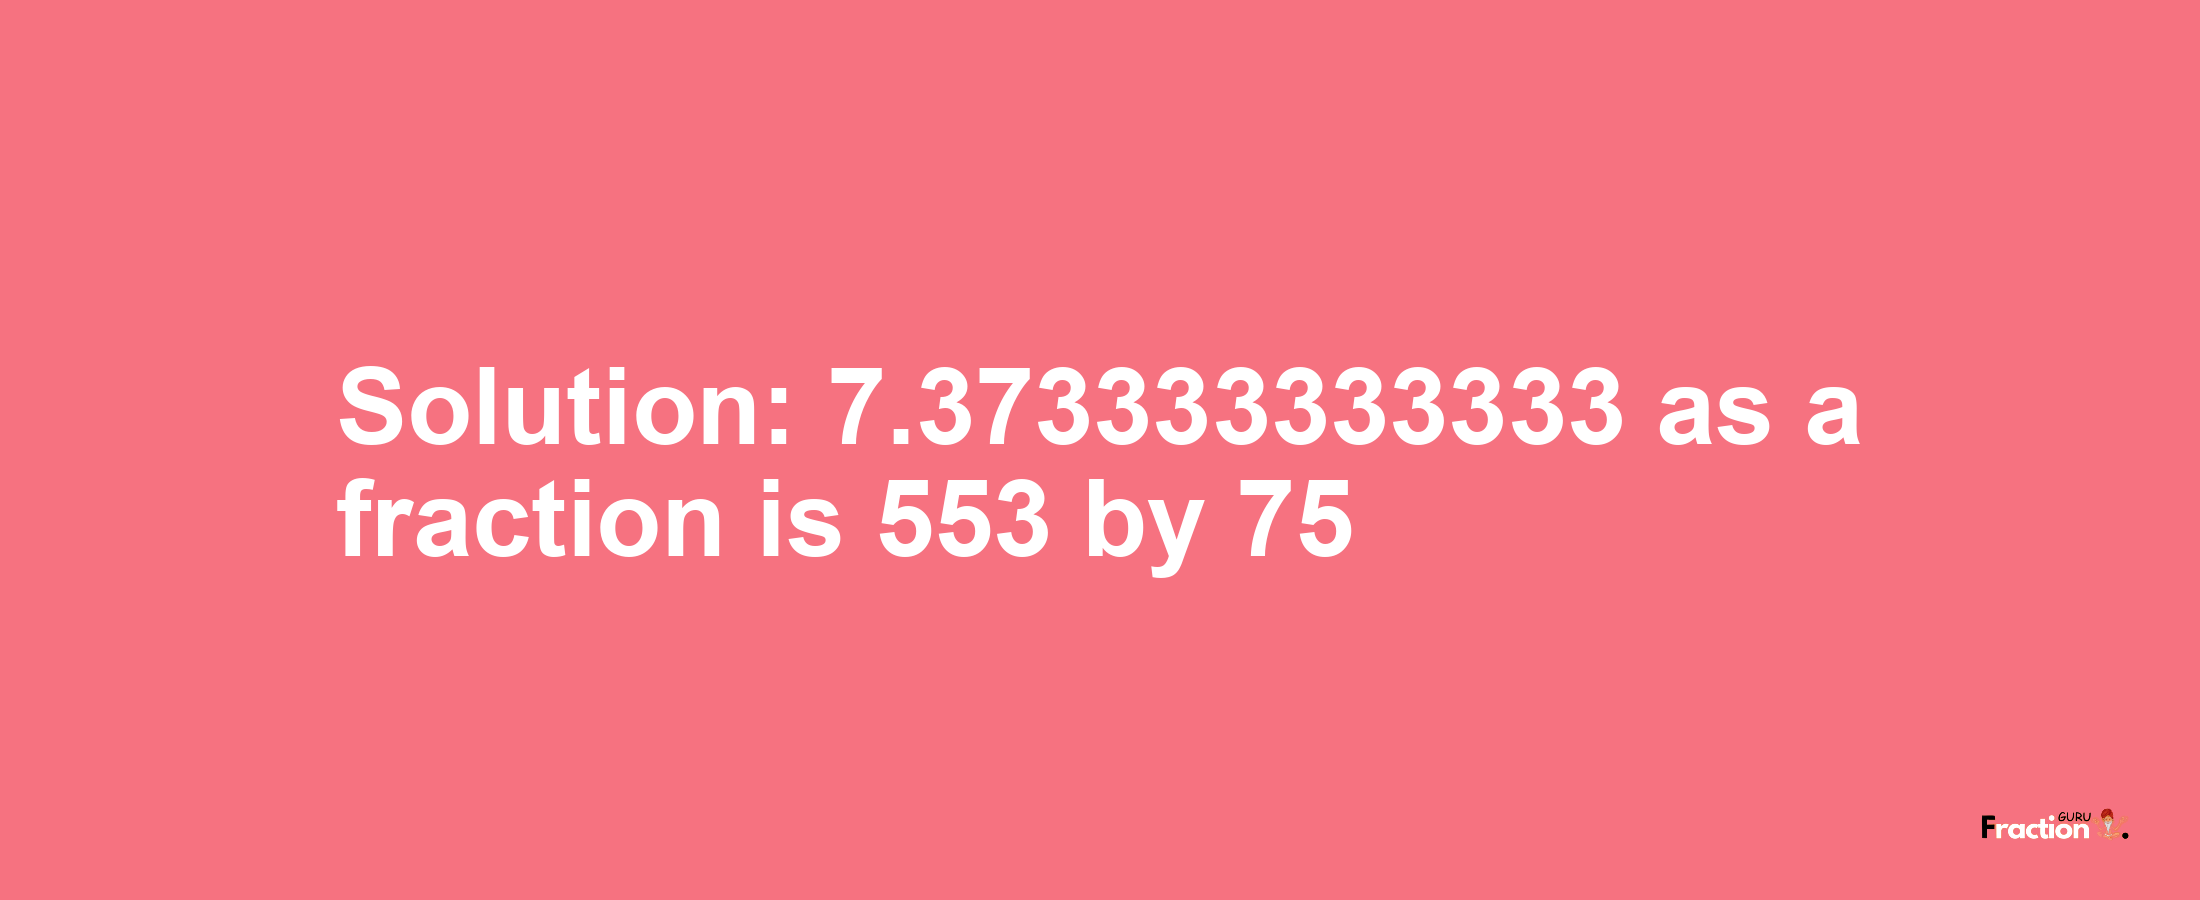 Solution:7.373333333333 as a fraction is 553/75